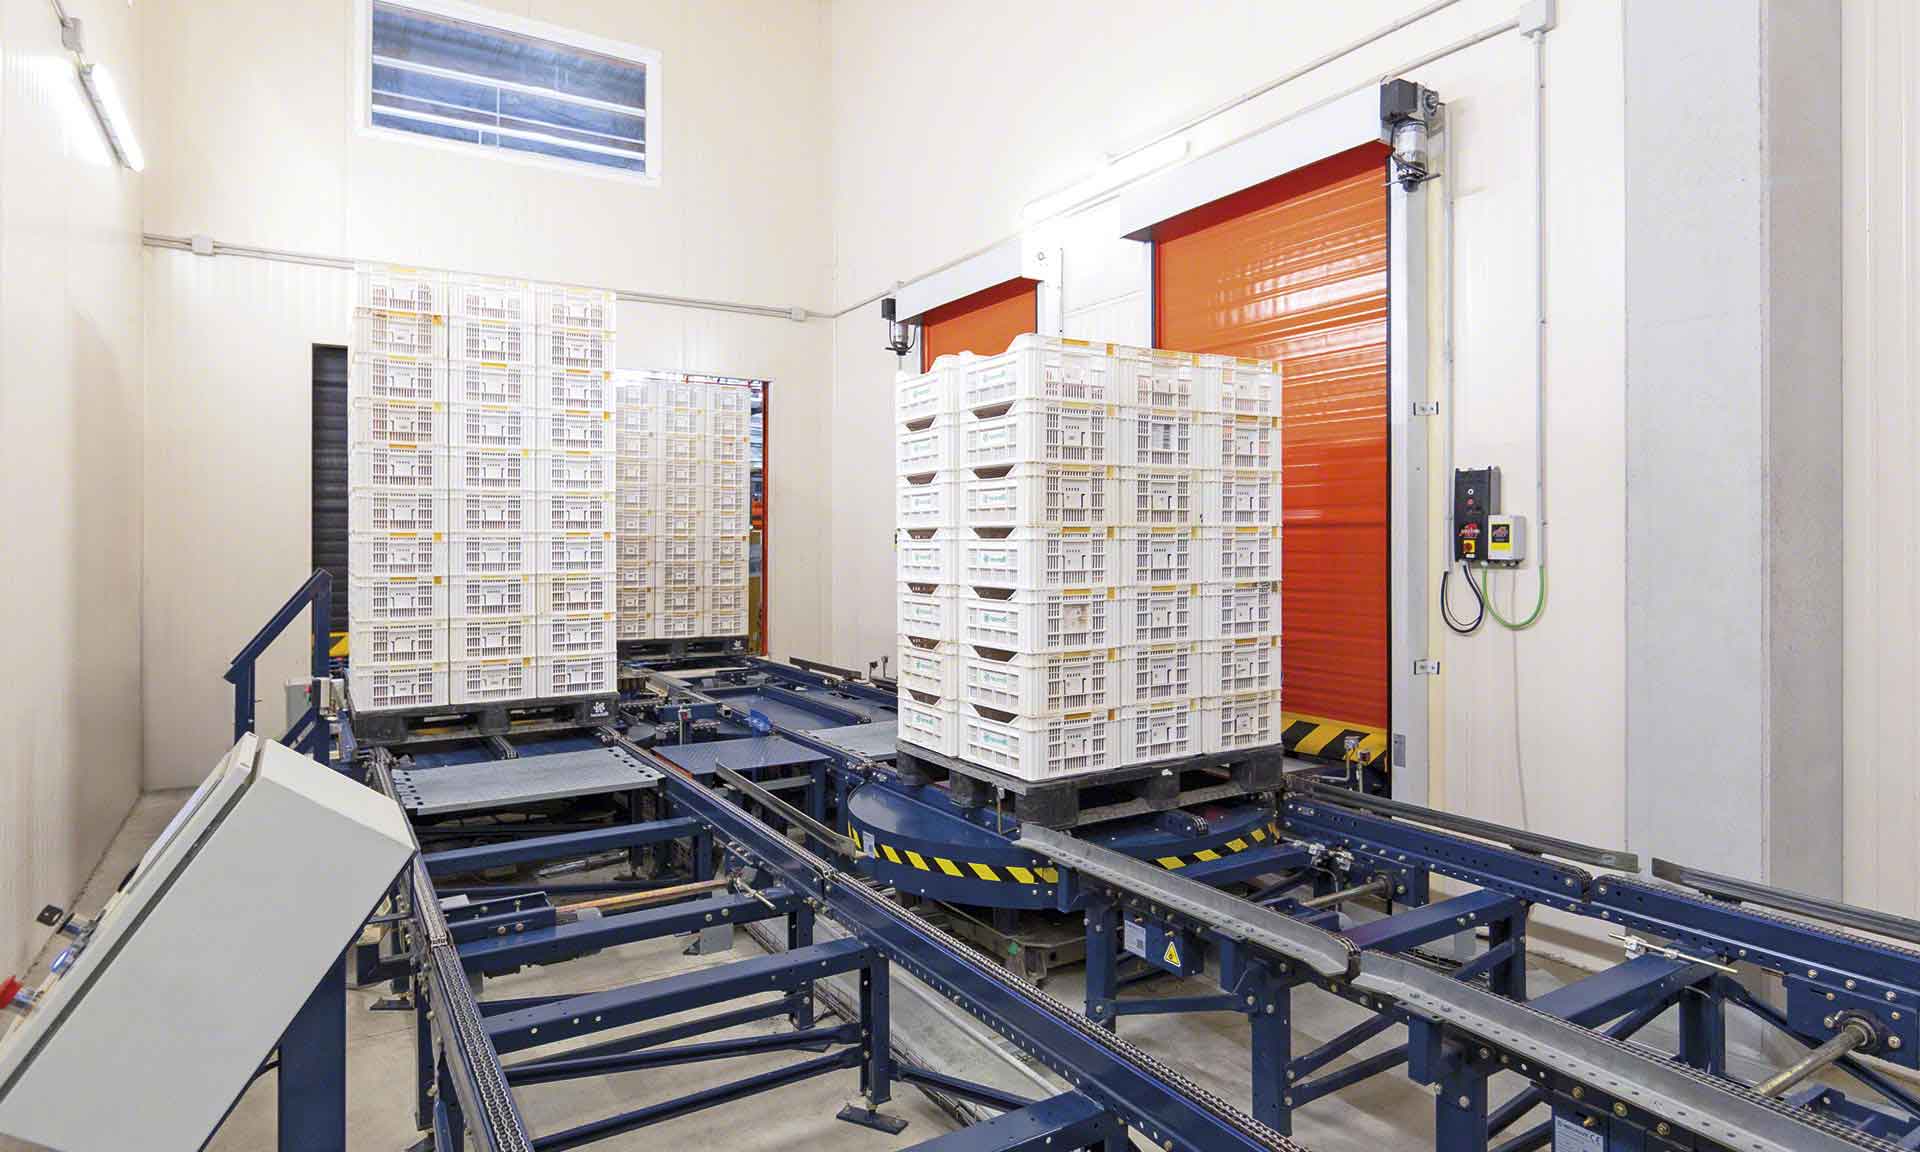 Cold storage warehousing maintains the goods at a controlled temperature to properly preserve them